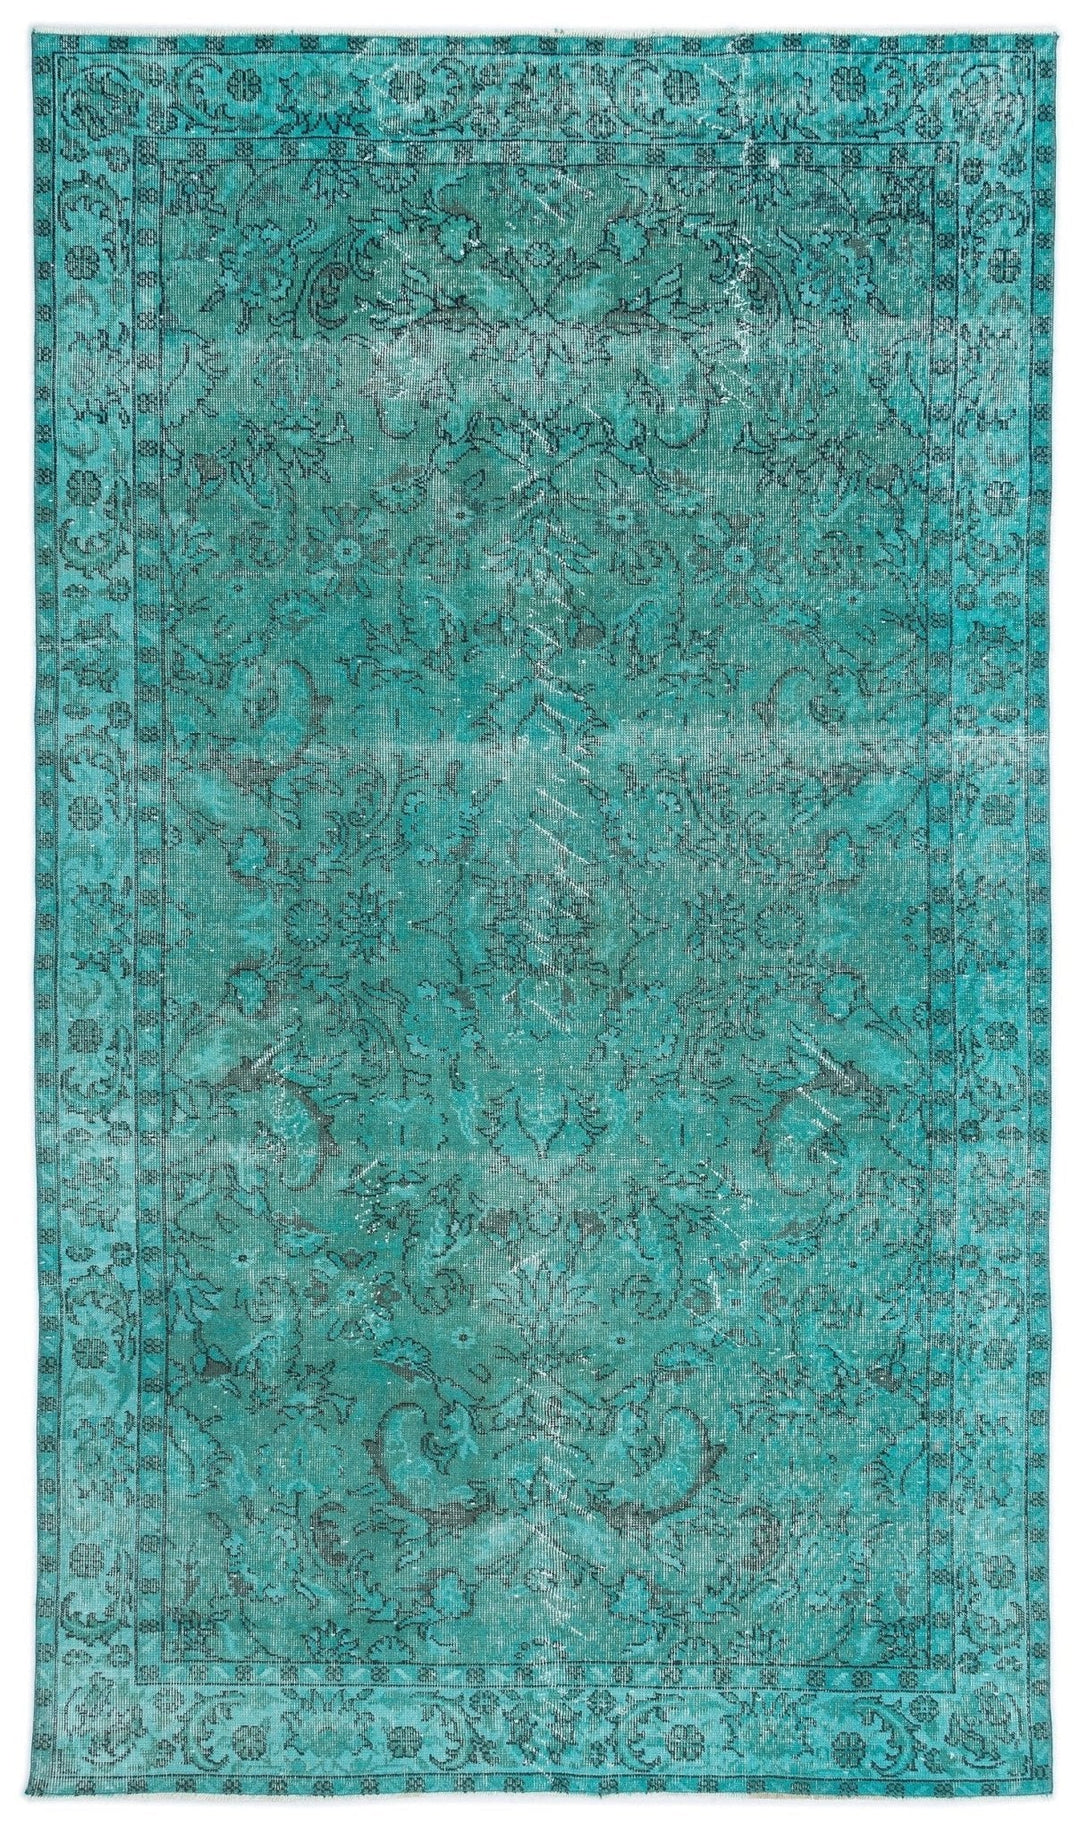 Athens 15940 Turquoise Tumbled Wool Hand Woven Carpet 165 x 283